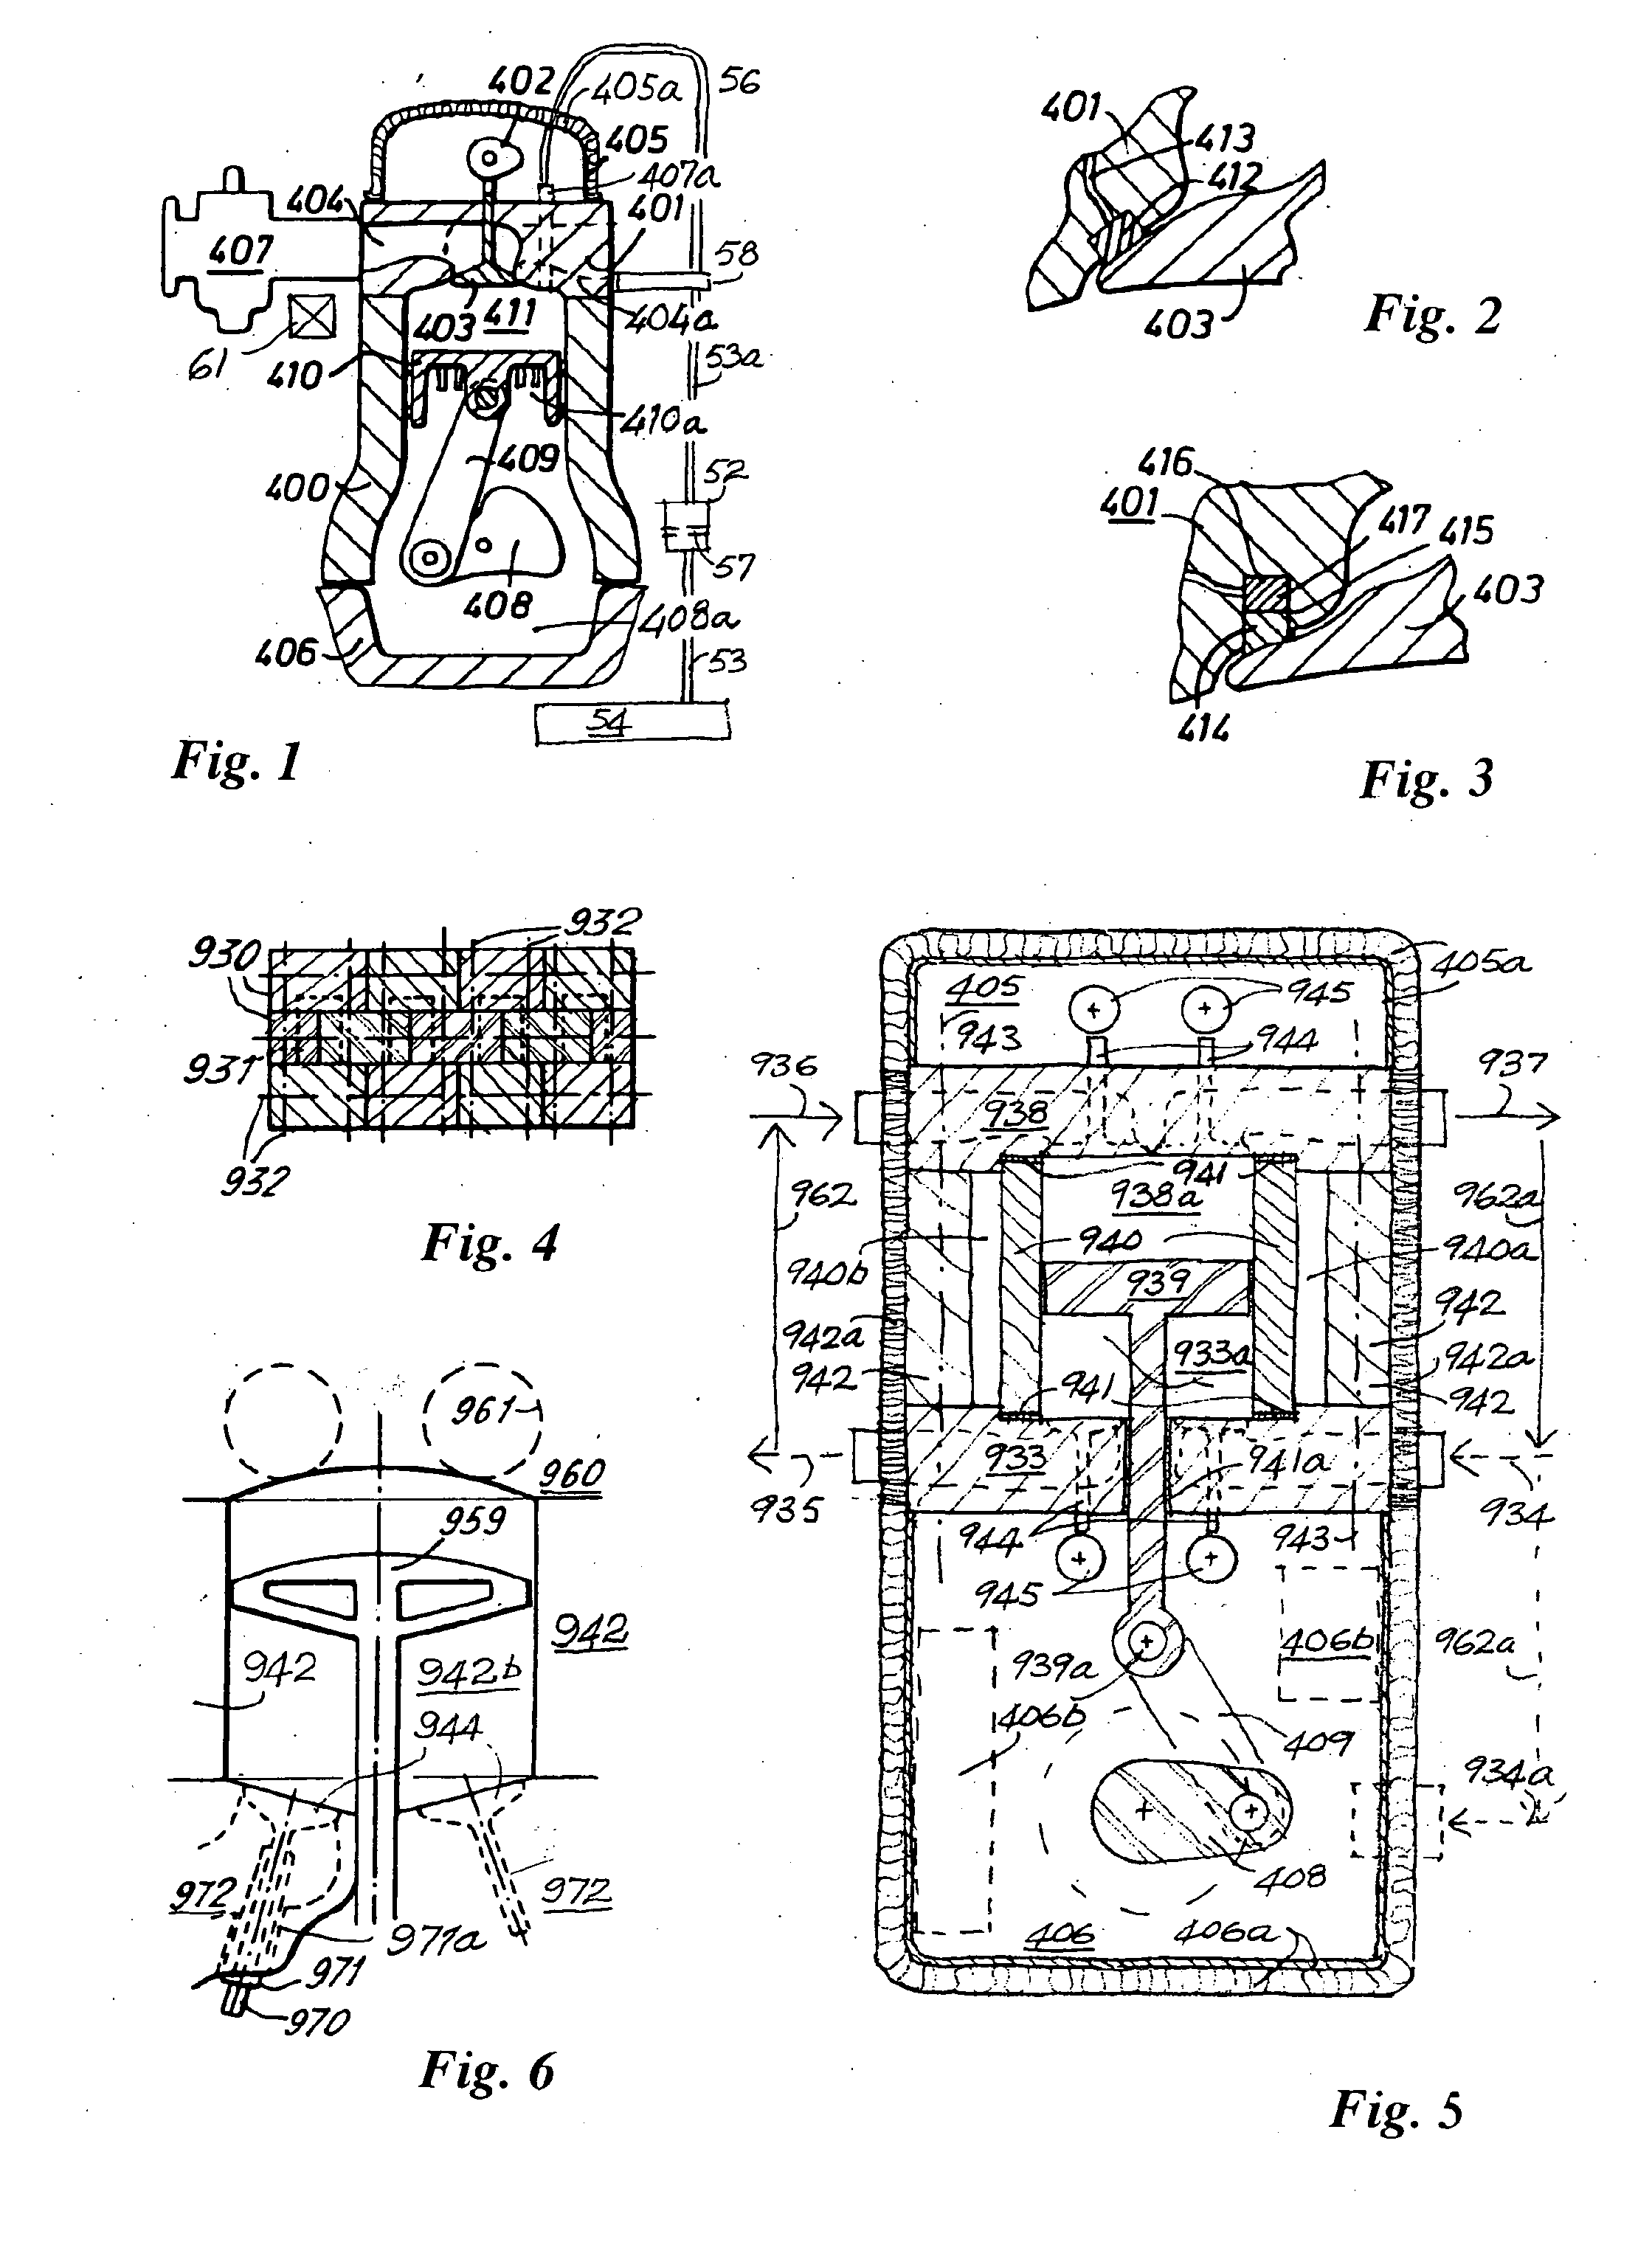 Reciprocating machine & other devices